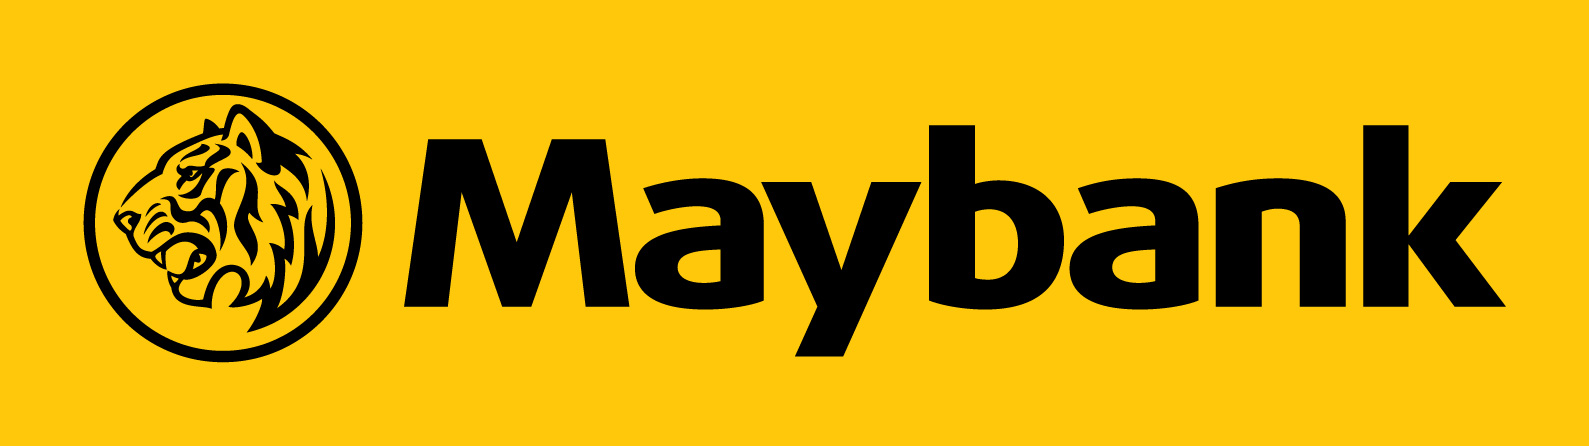 Maybank to focus on transaction banking, corporate lending and treasury services in Myanmar